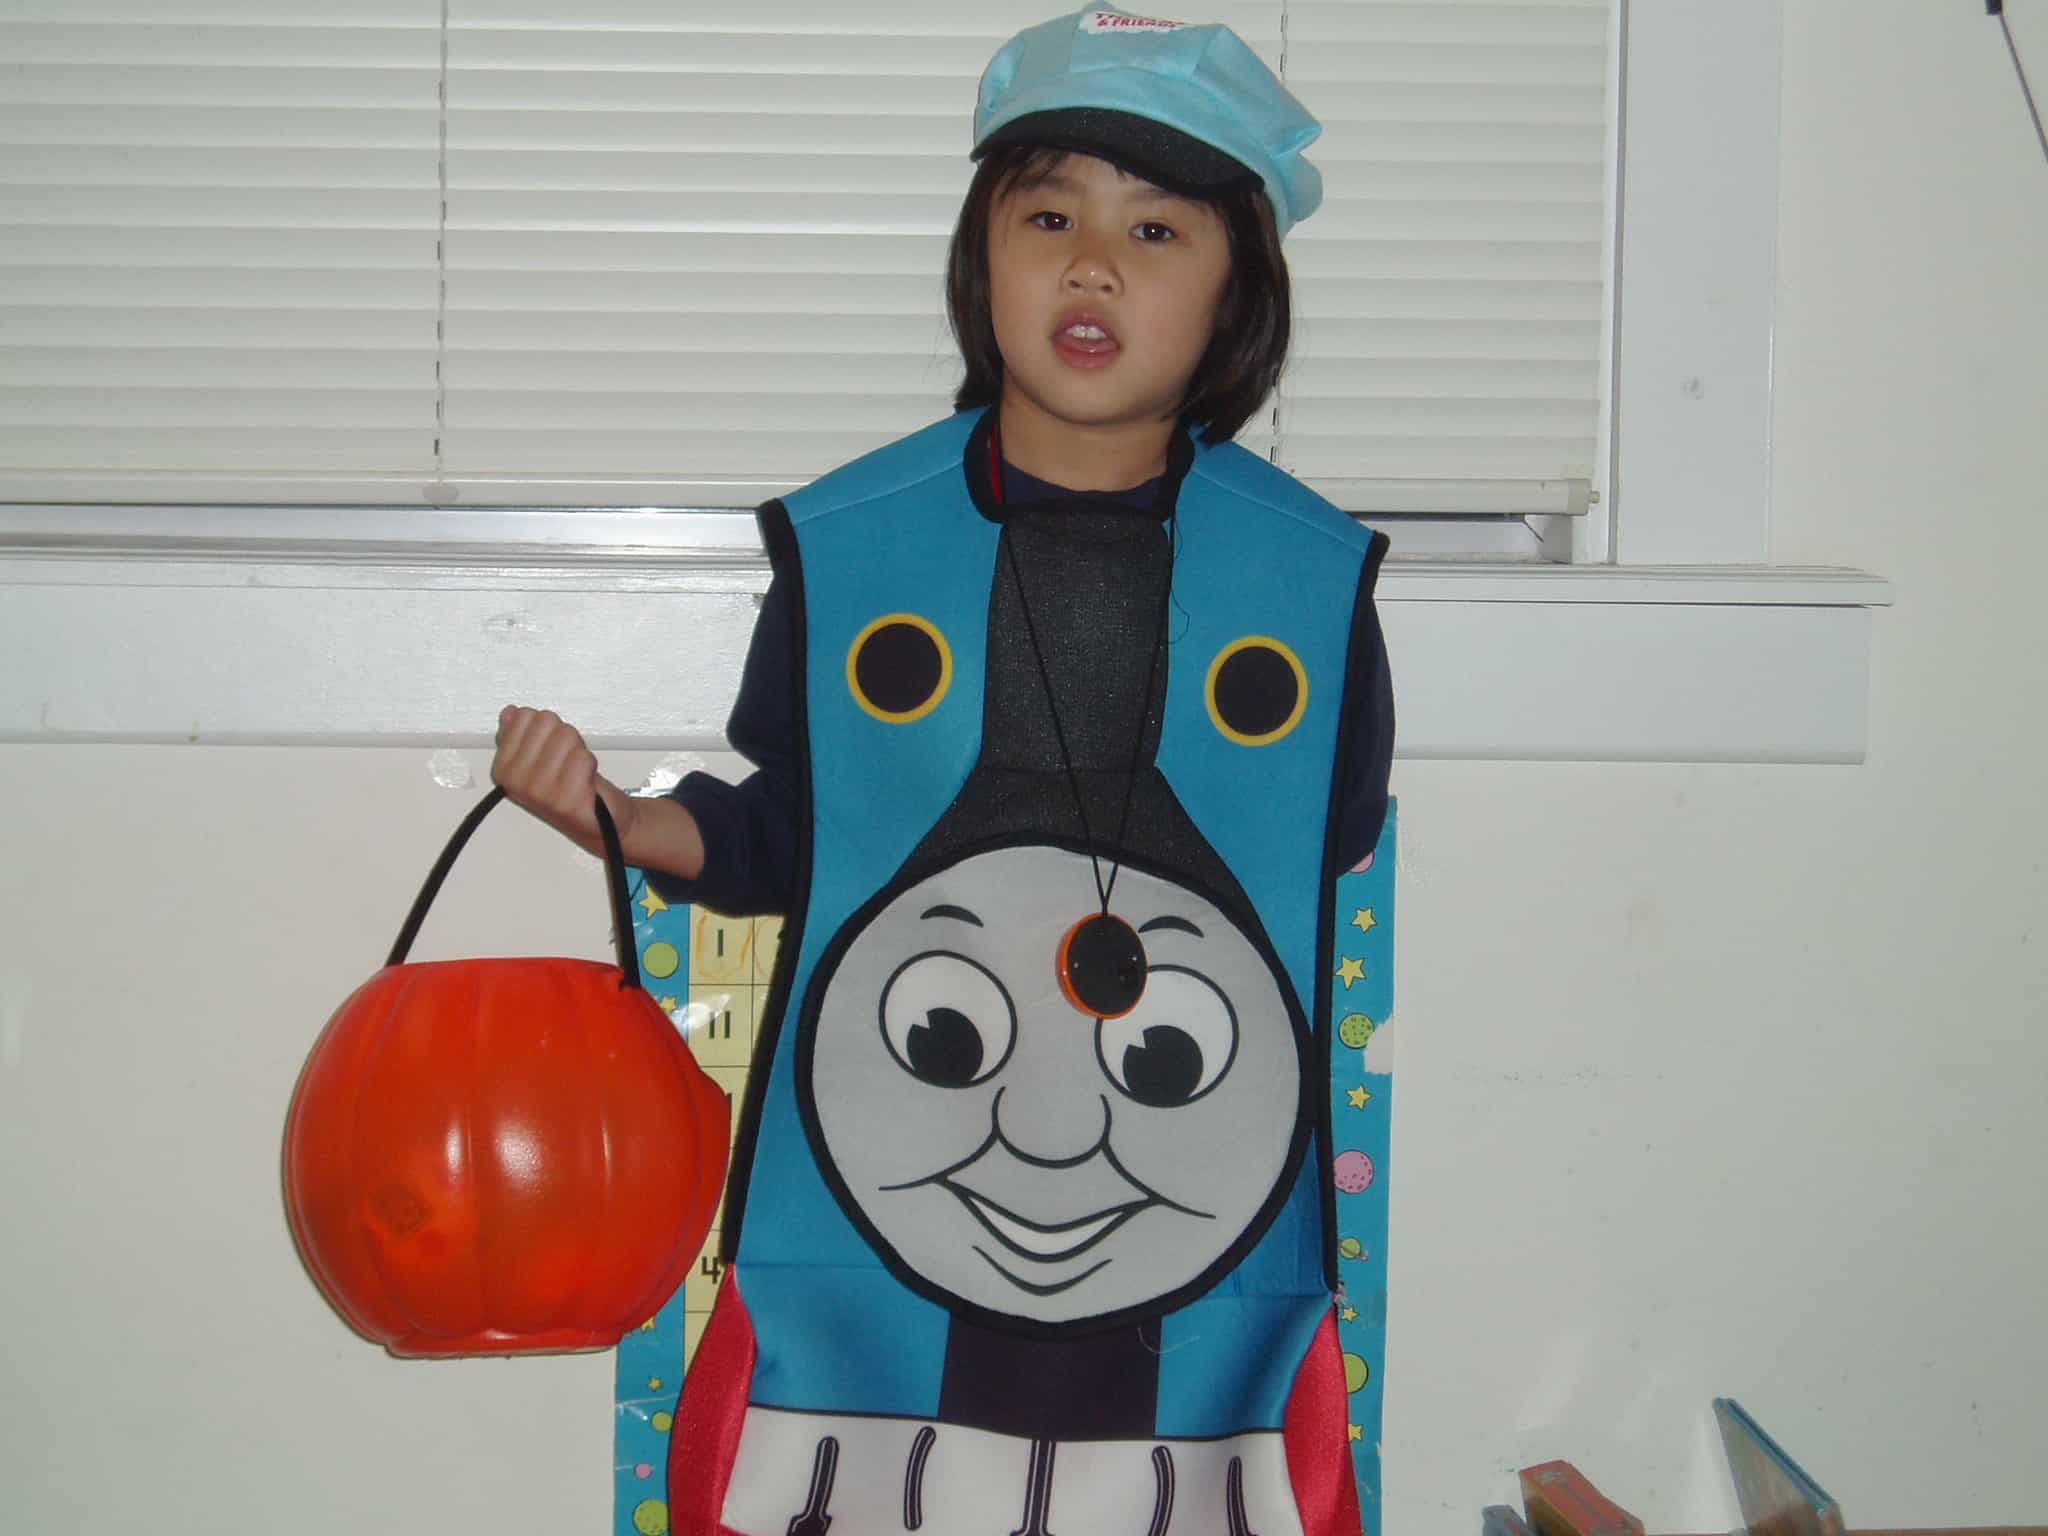 A young toddler Meggie is wearing a Thomas the Train Halloween costume. They are holding an orange pumpkin candy basket. Jefferson City, Missouri, United States of America